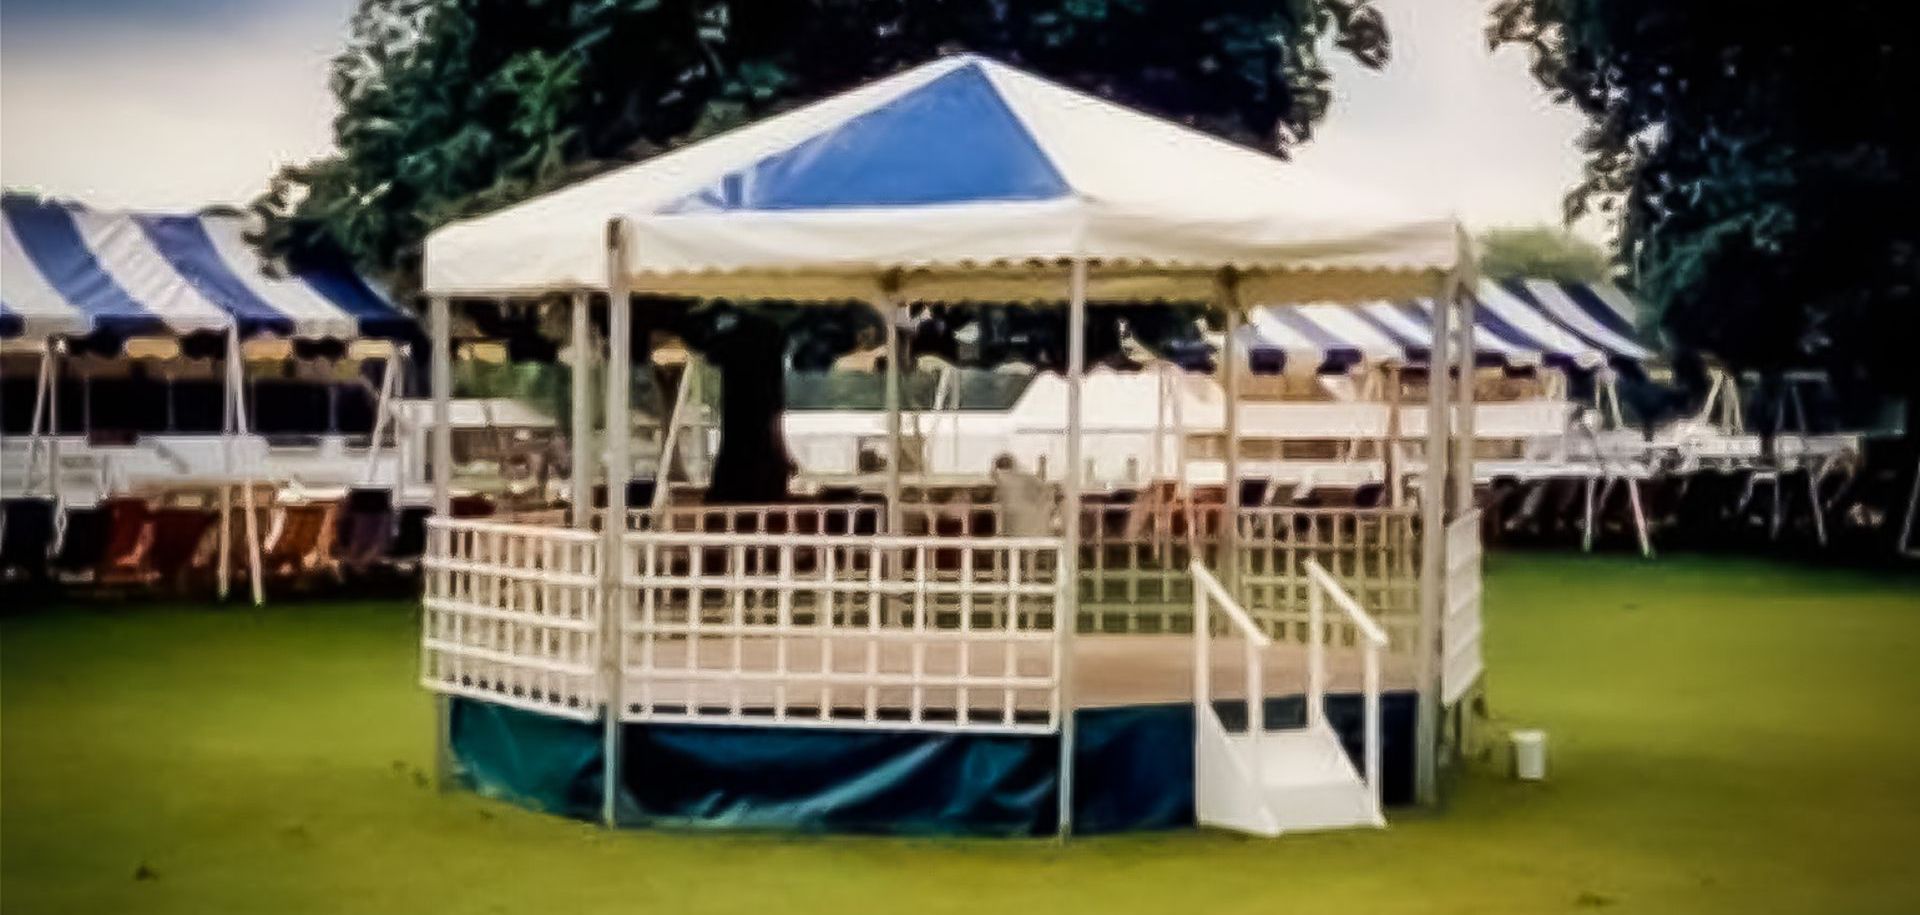 A bandstand in a green field with a blue skirt and blue and white canopy. 